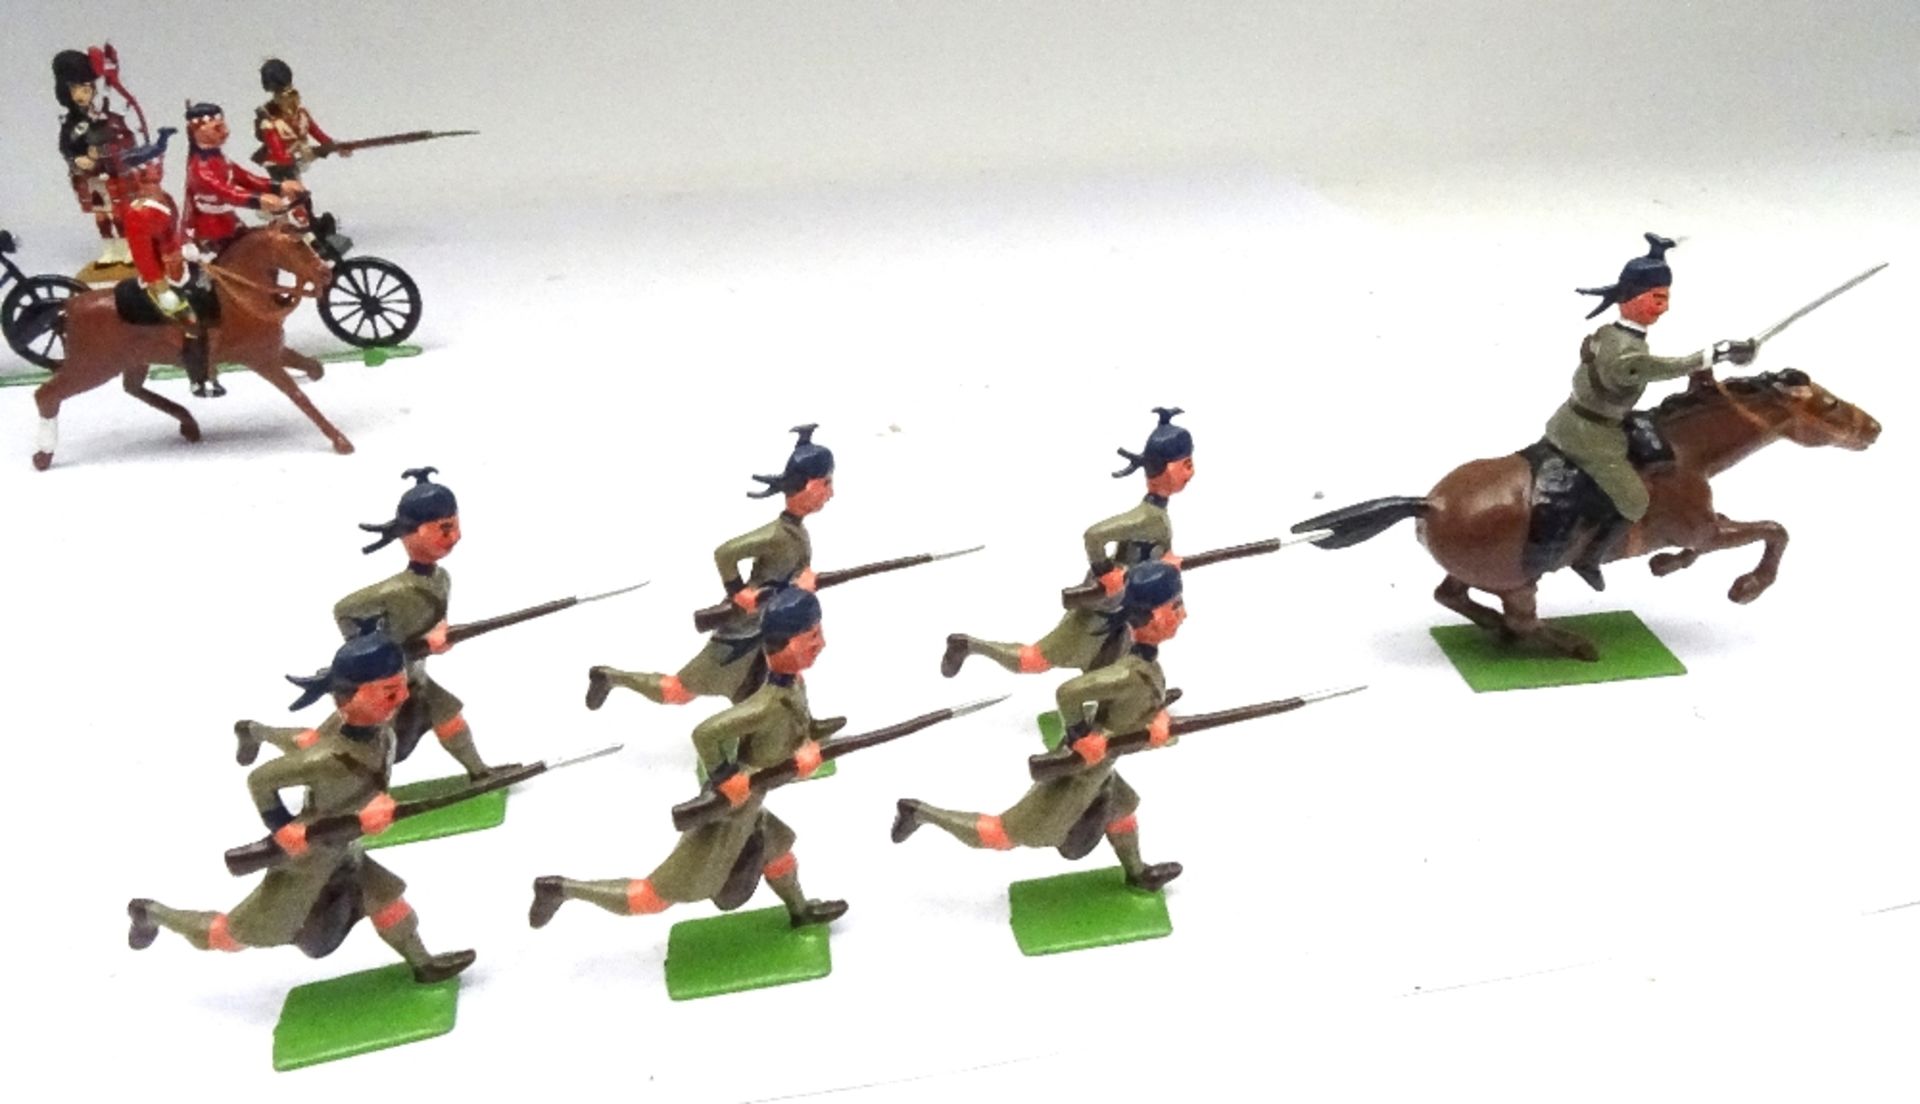 Highlander New Toy Soldiers - Image 2 of 7